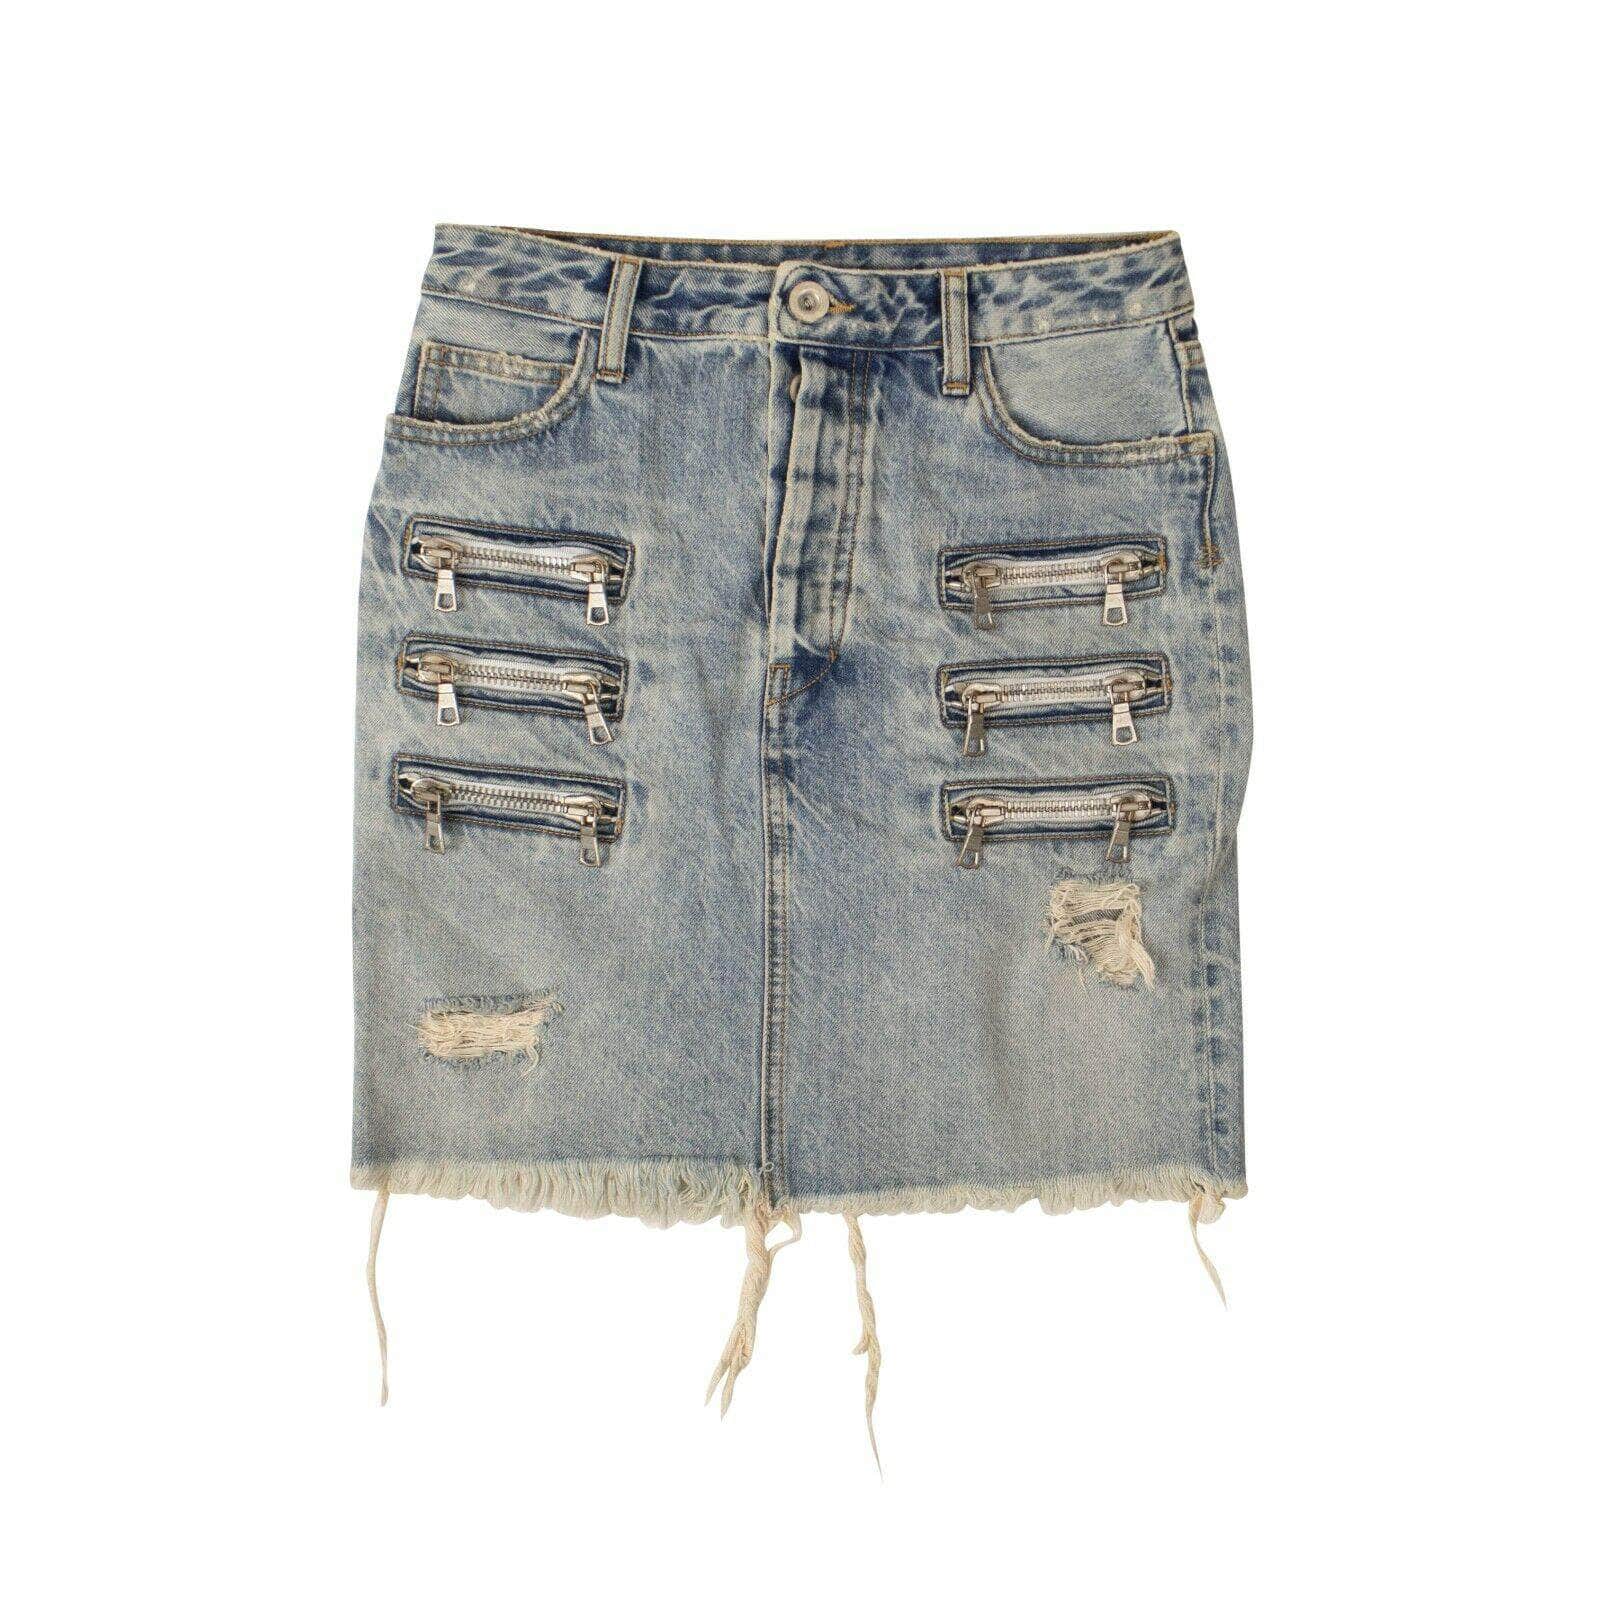 Unravel Project channelenable-all, chicmi, couponcollection, gender-womens, main-clothing, size-25, size-26, size-27, size-28, under-250, unravel-project, womens-mini-skirts Denim Zip-Pocket Mini Skirt